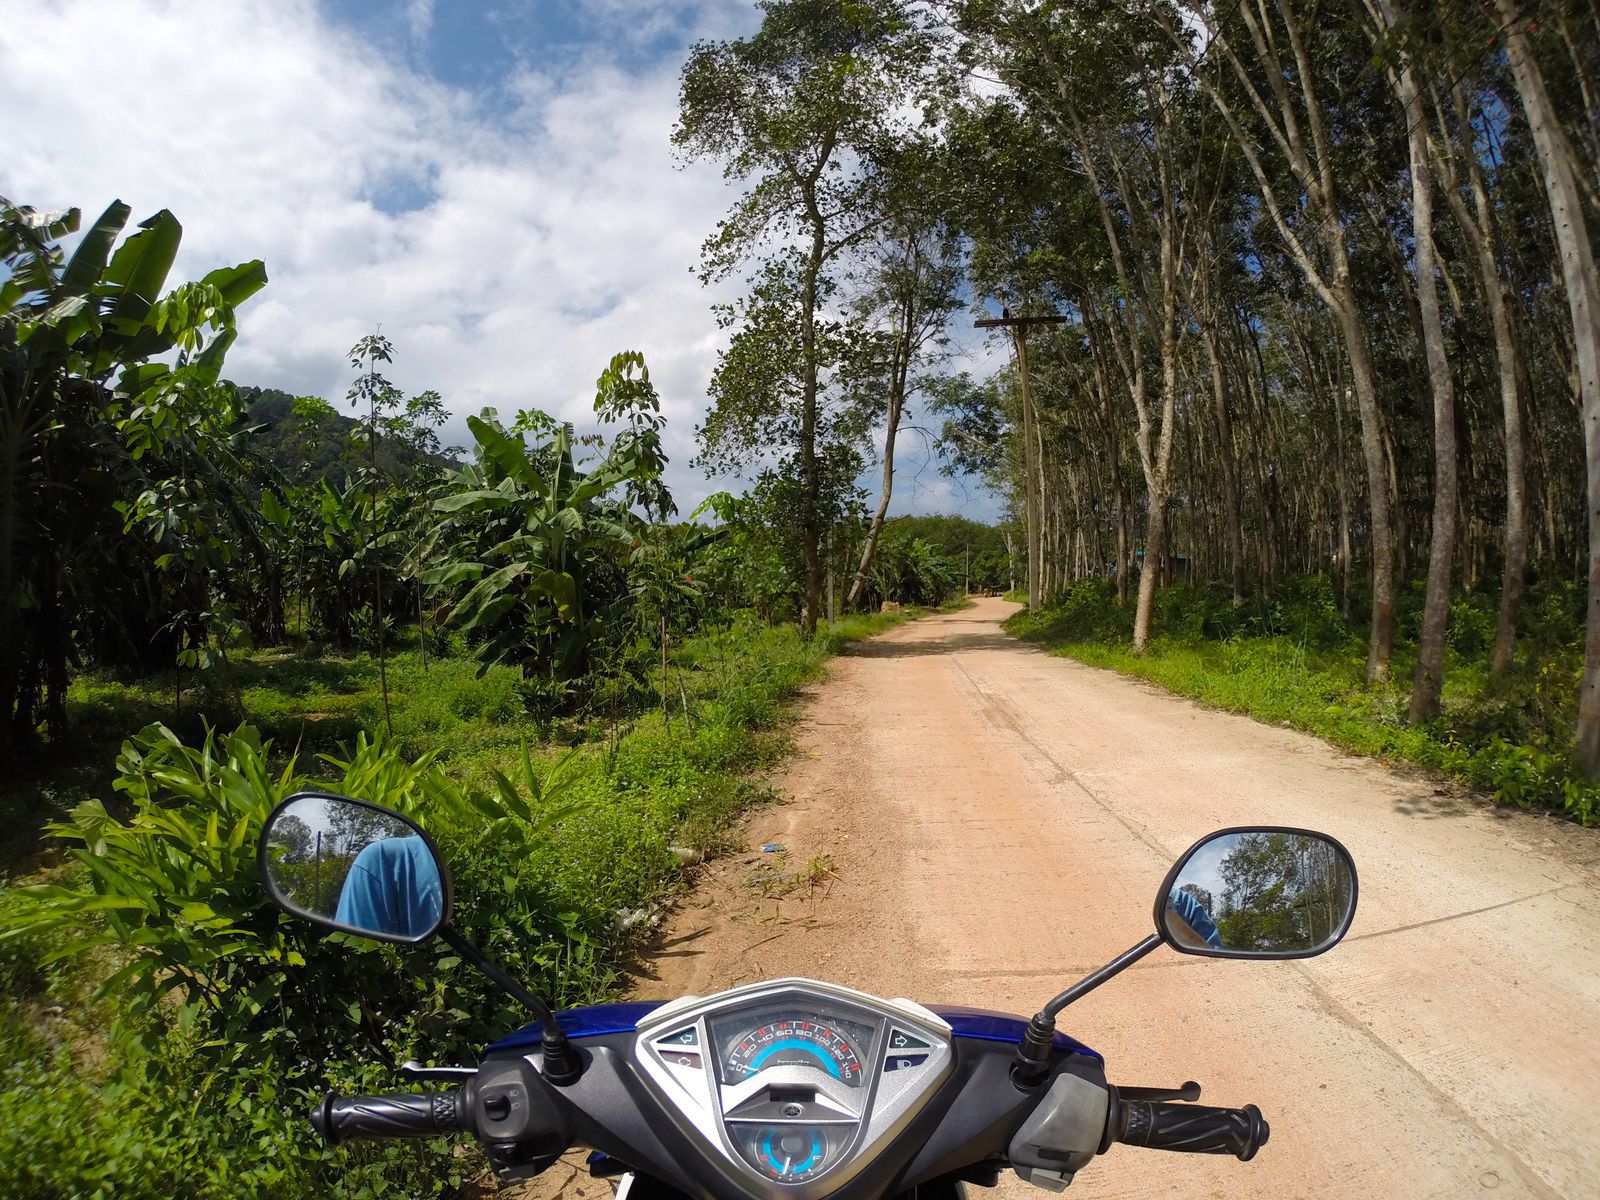 Renting a Moto in Pai - Things to do in Pai